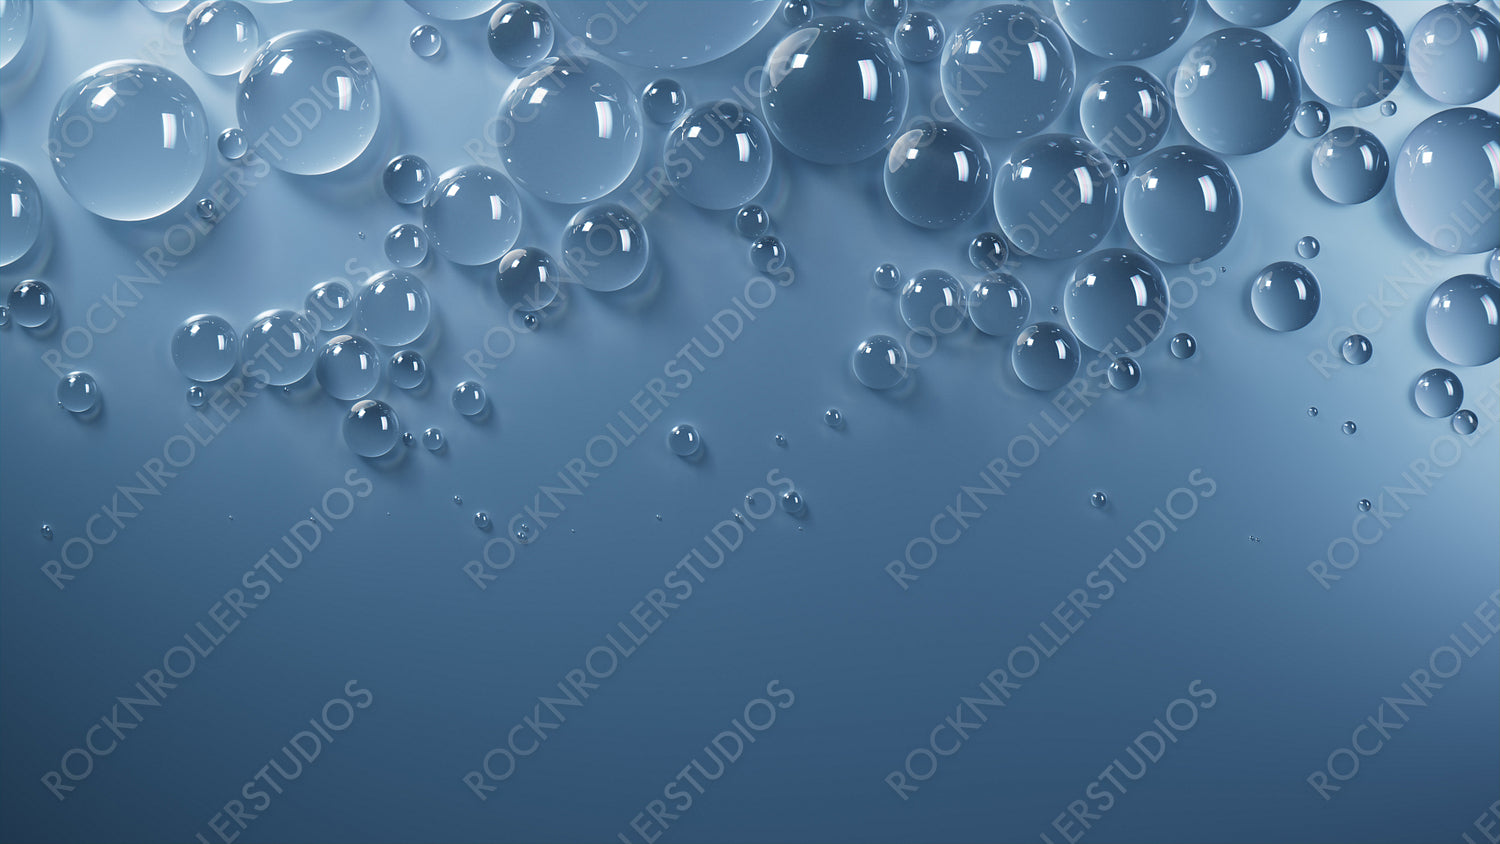 Dew Droplets on Blue Background. Contemporary Banner with Copy-Space.